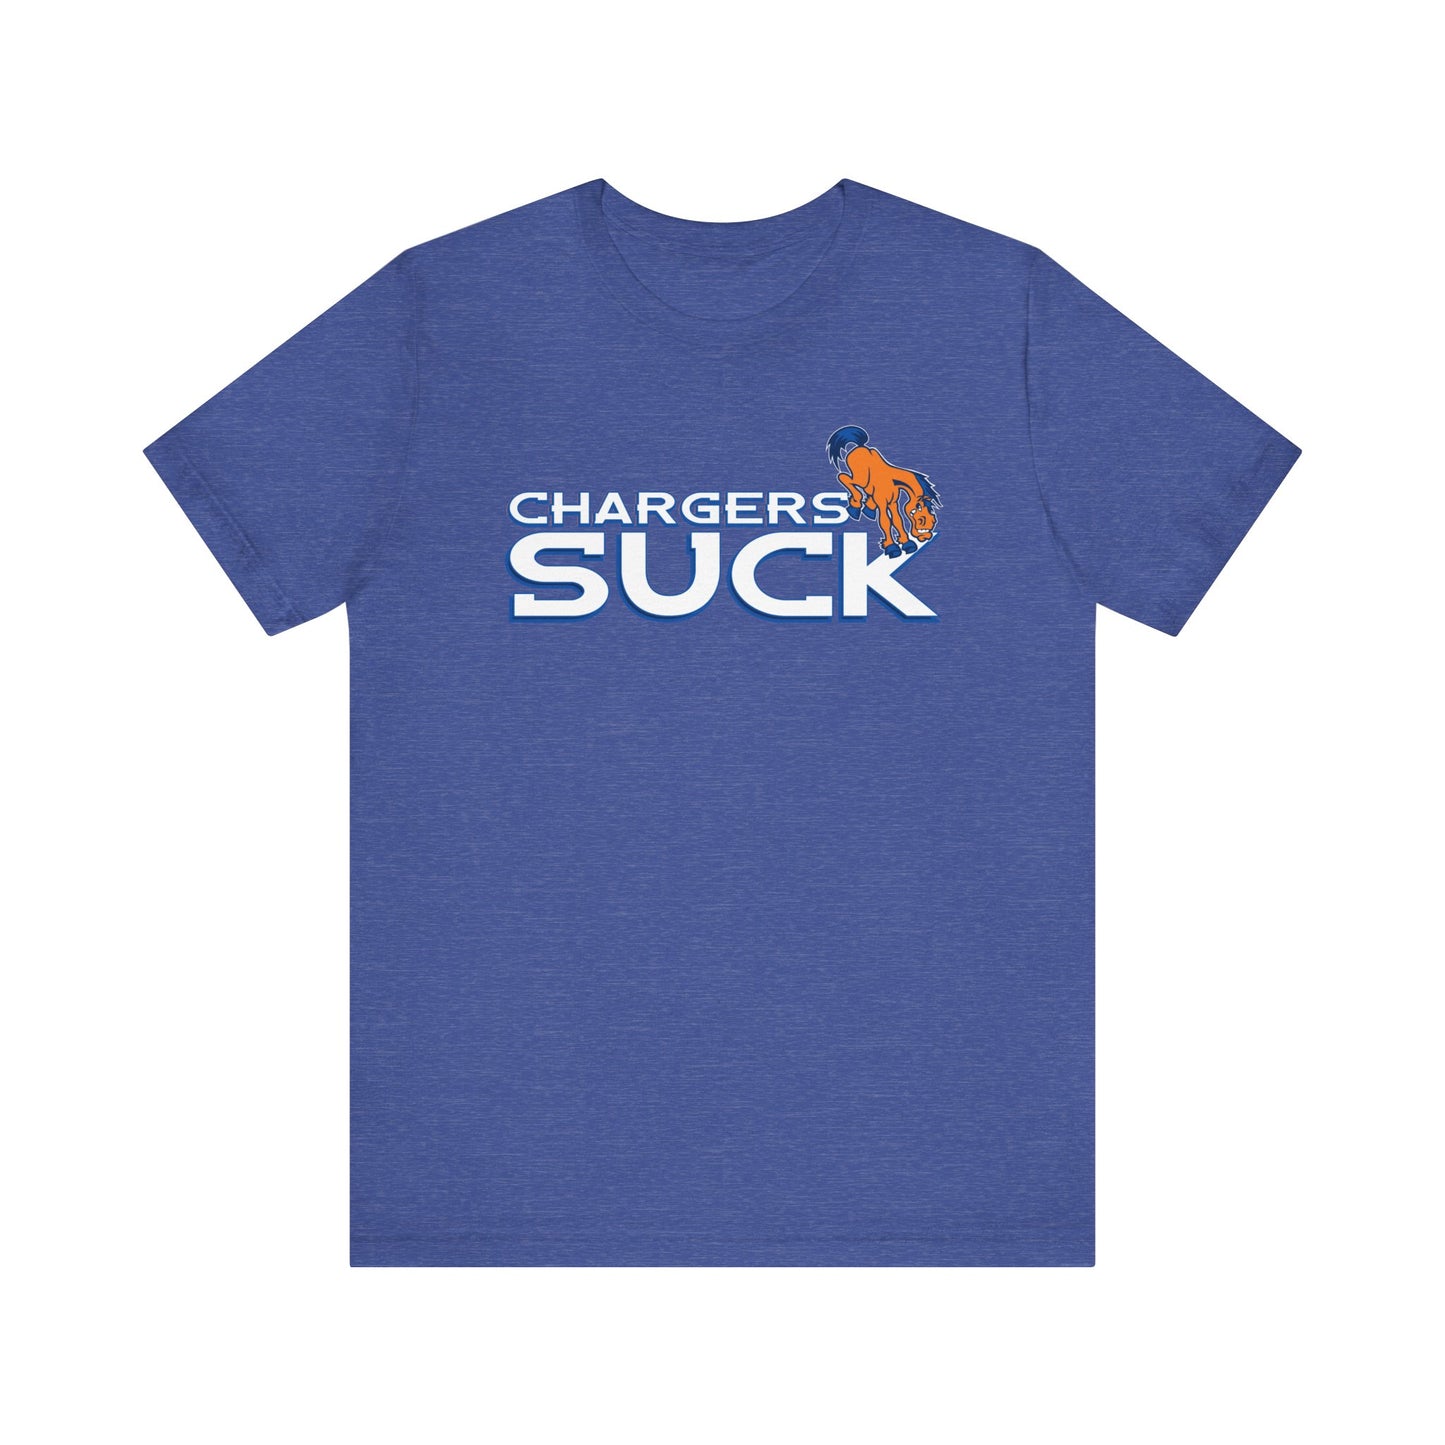 That Team Without Fans Sucks - Unisex Jersey Short Sleeve Tee